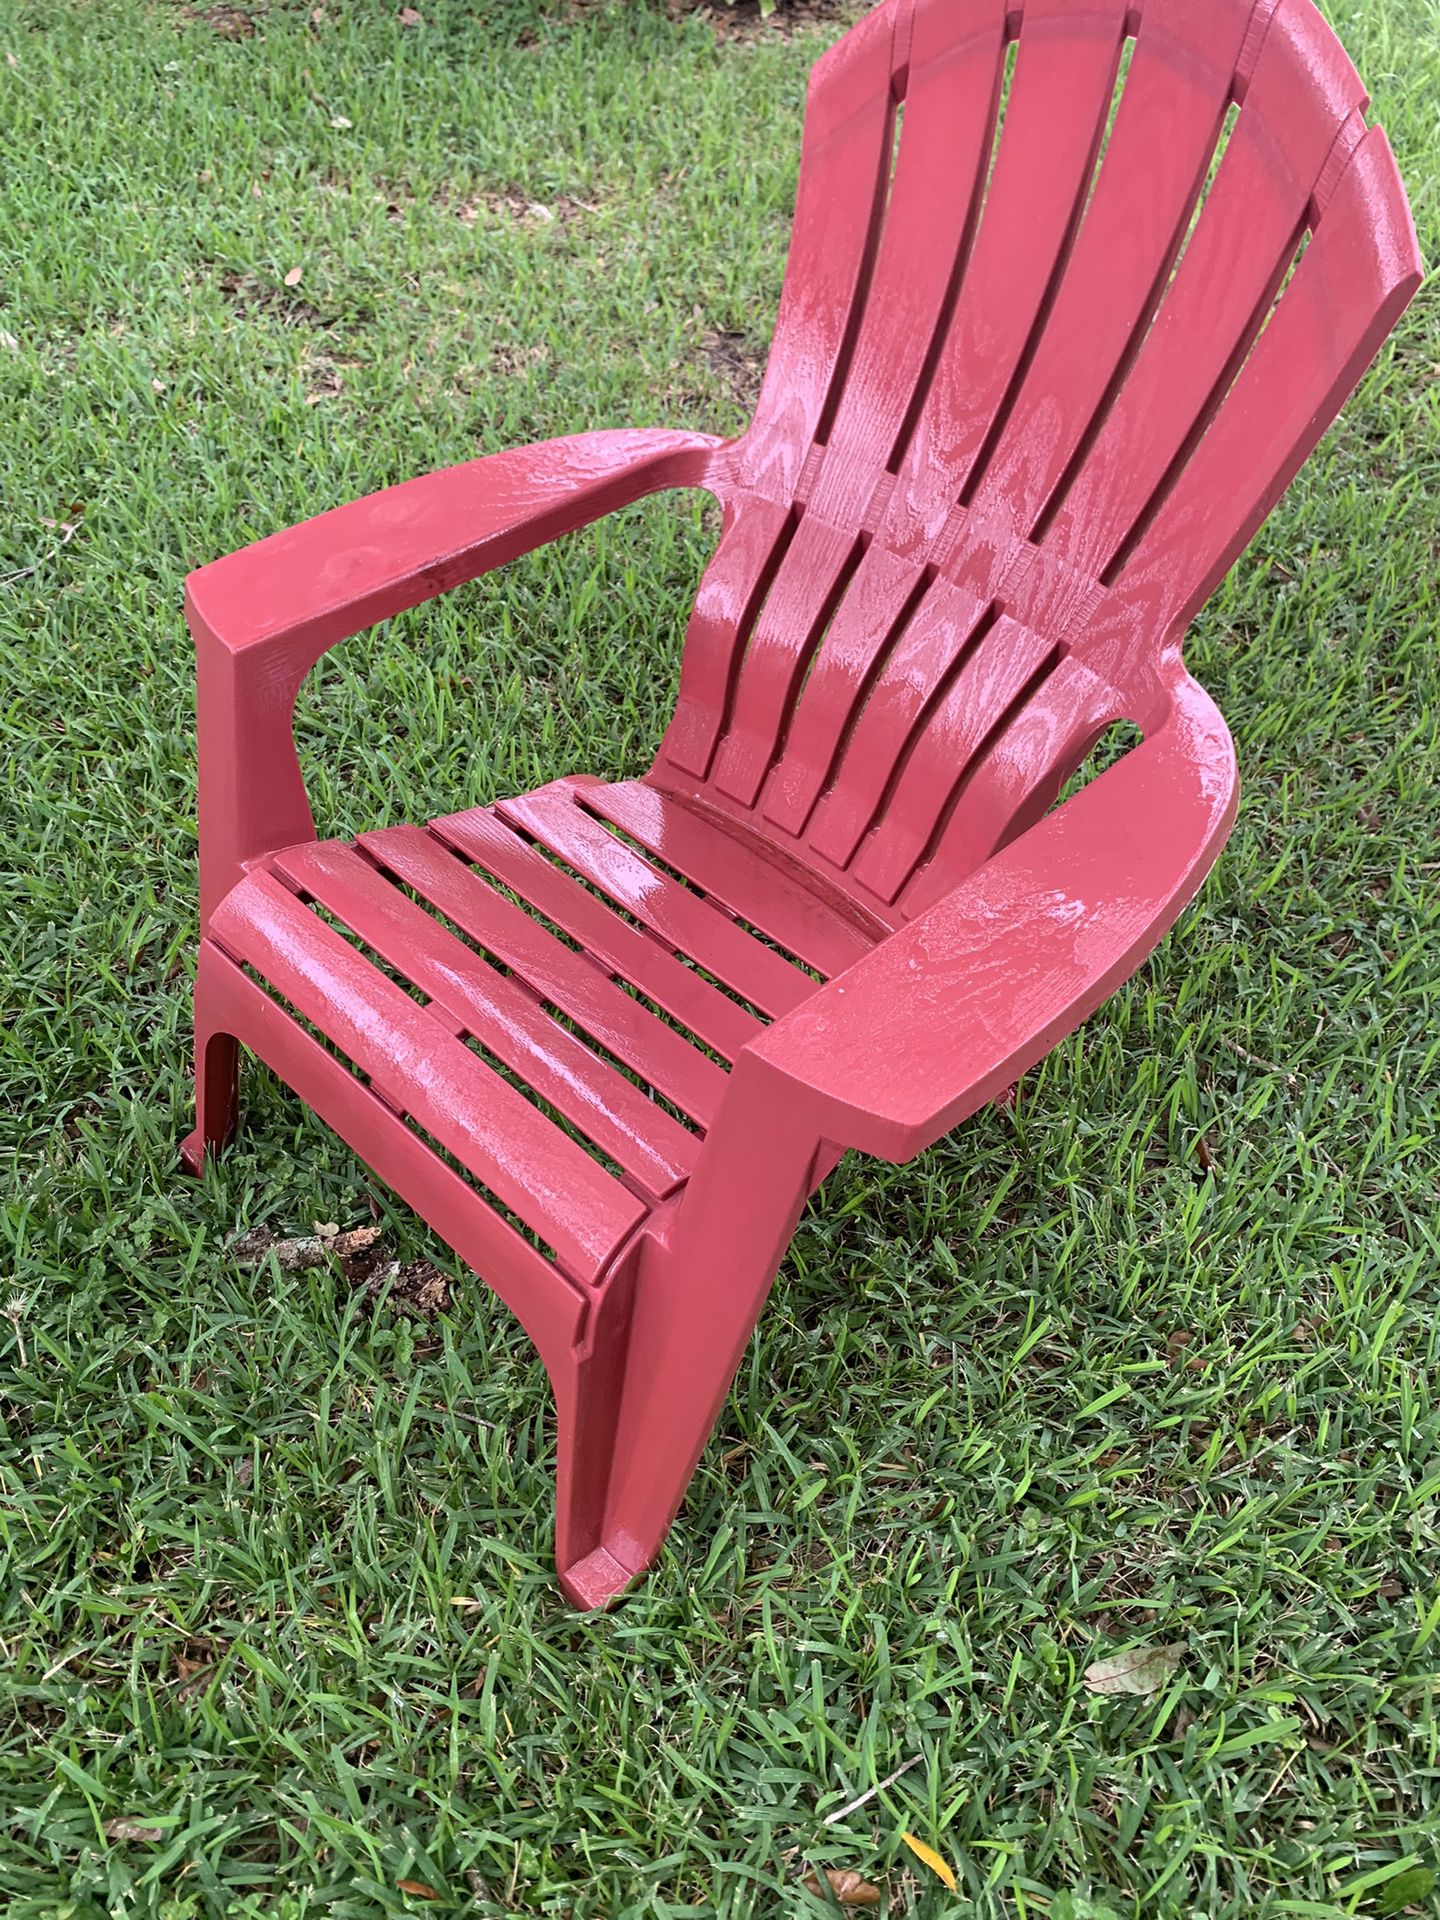 Adirondack Chairs (6) $15 Each Or $75 ALL